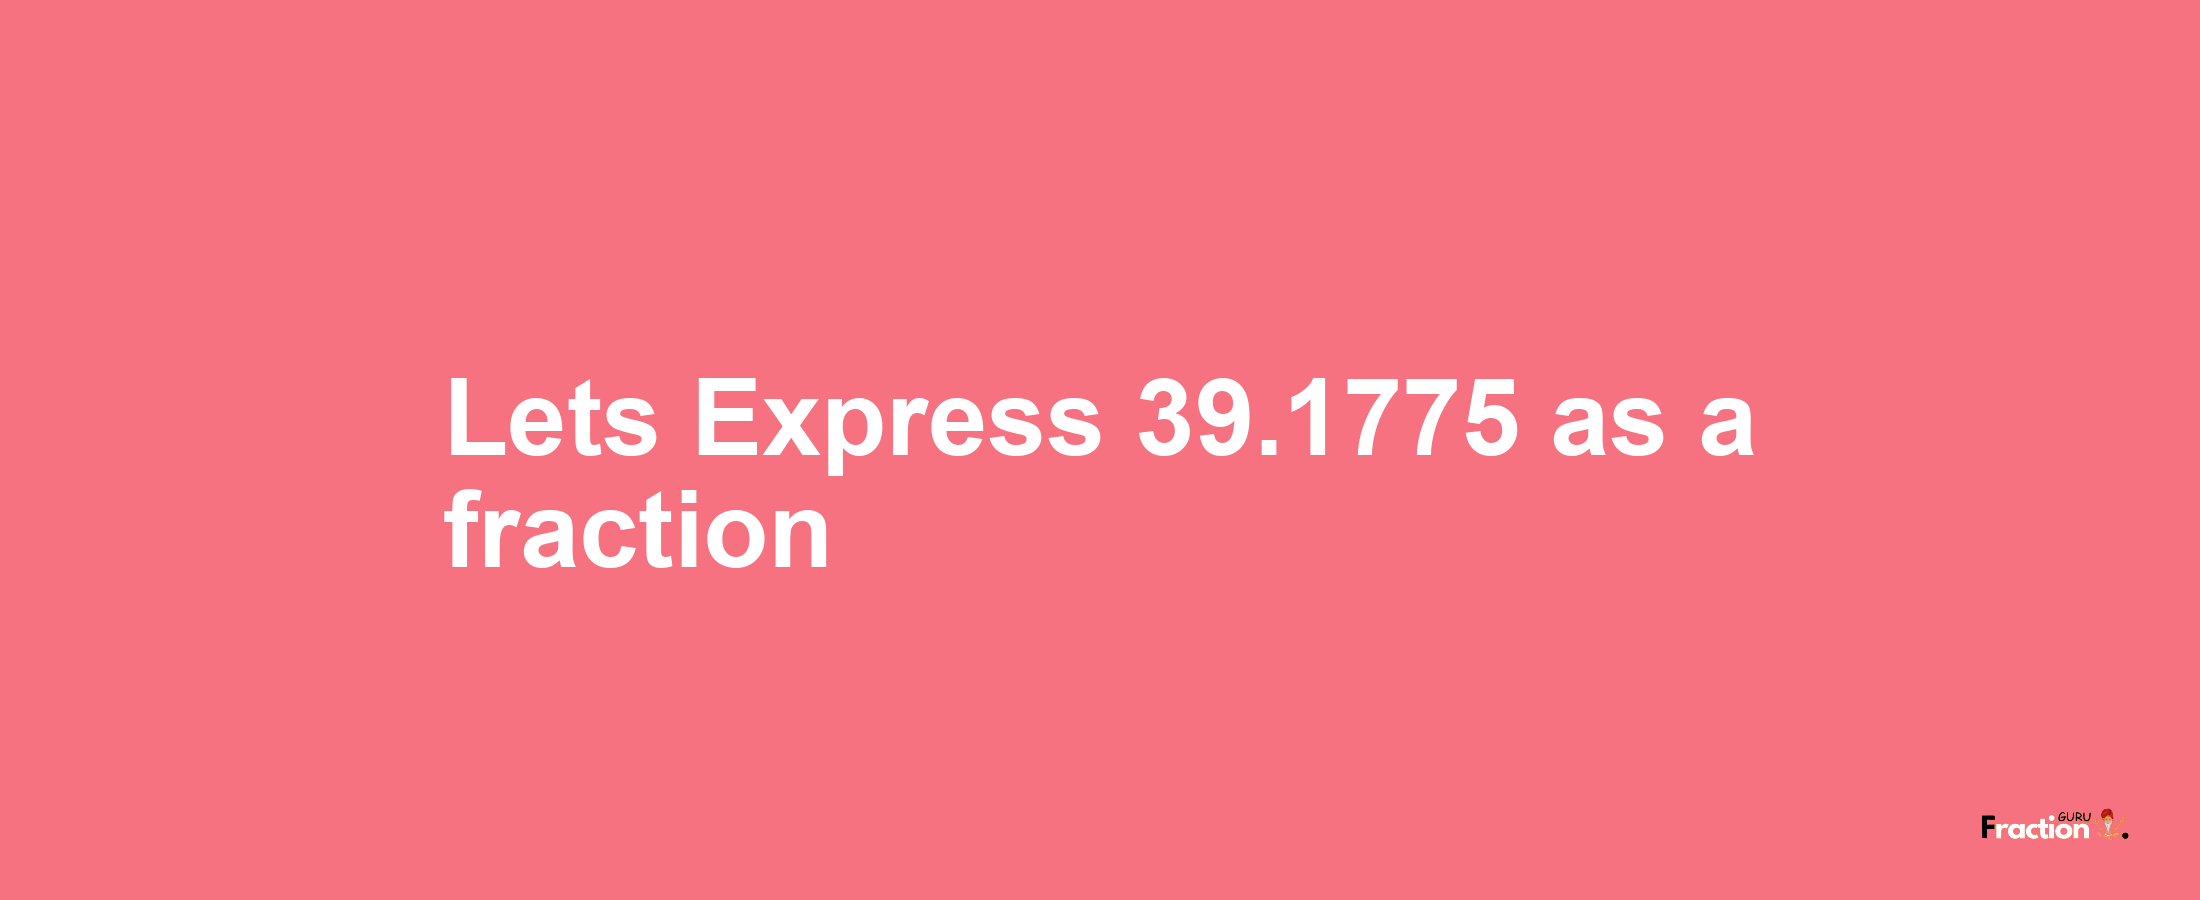 Lets Express 39.1775 as afraction